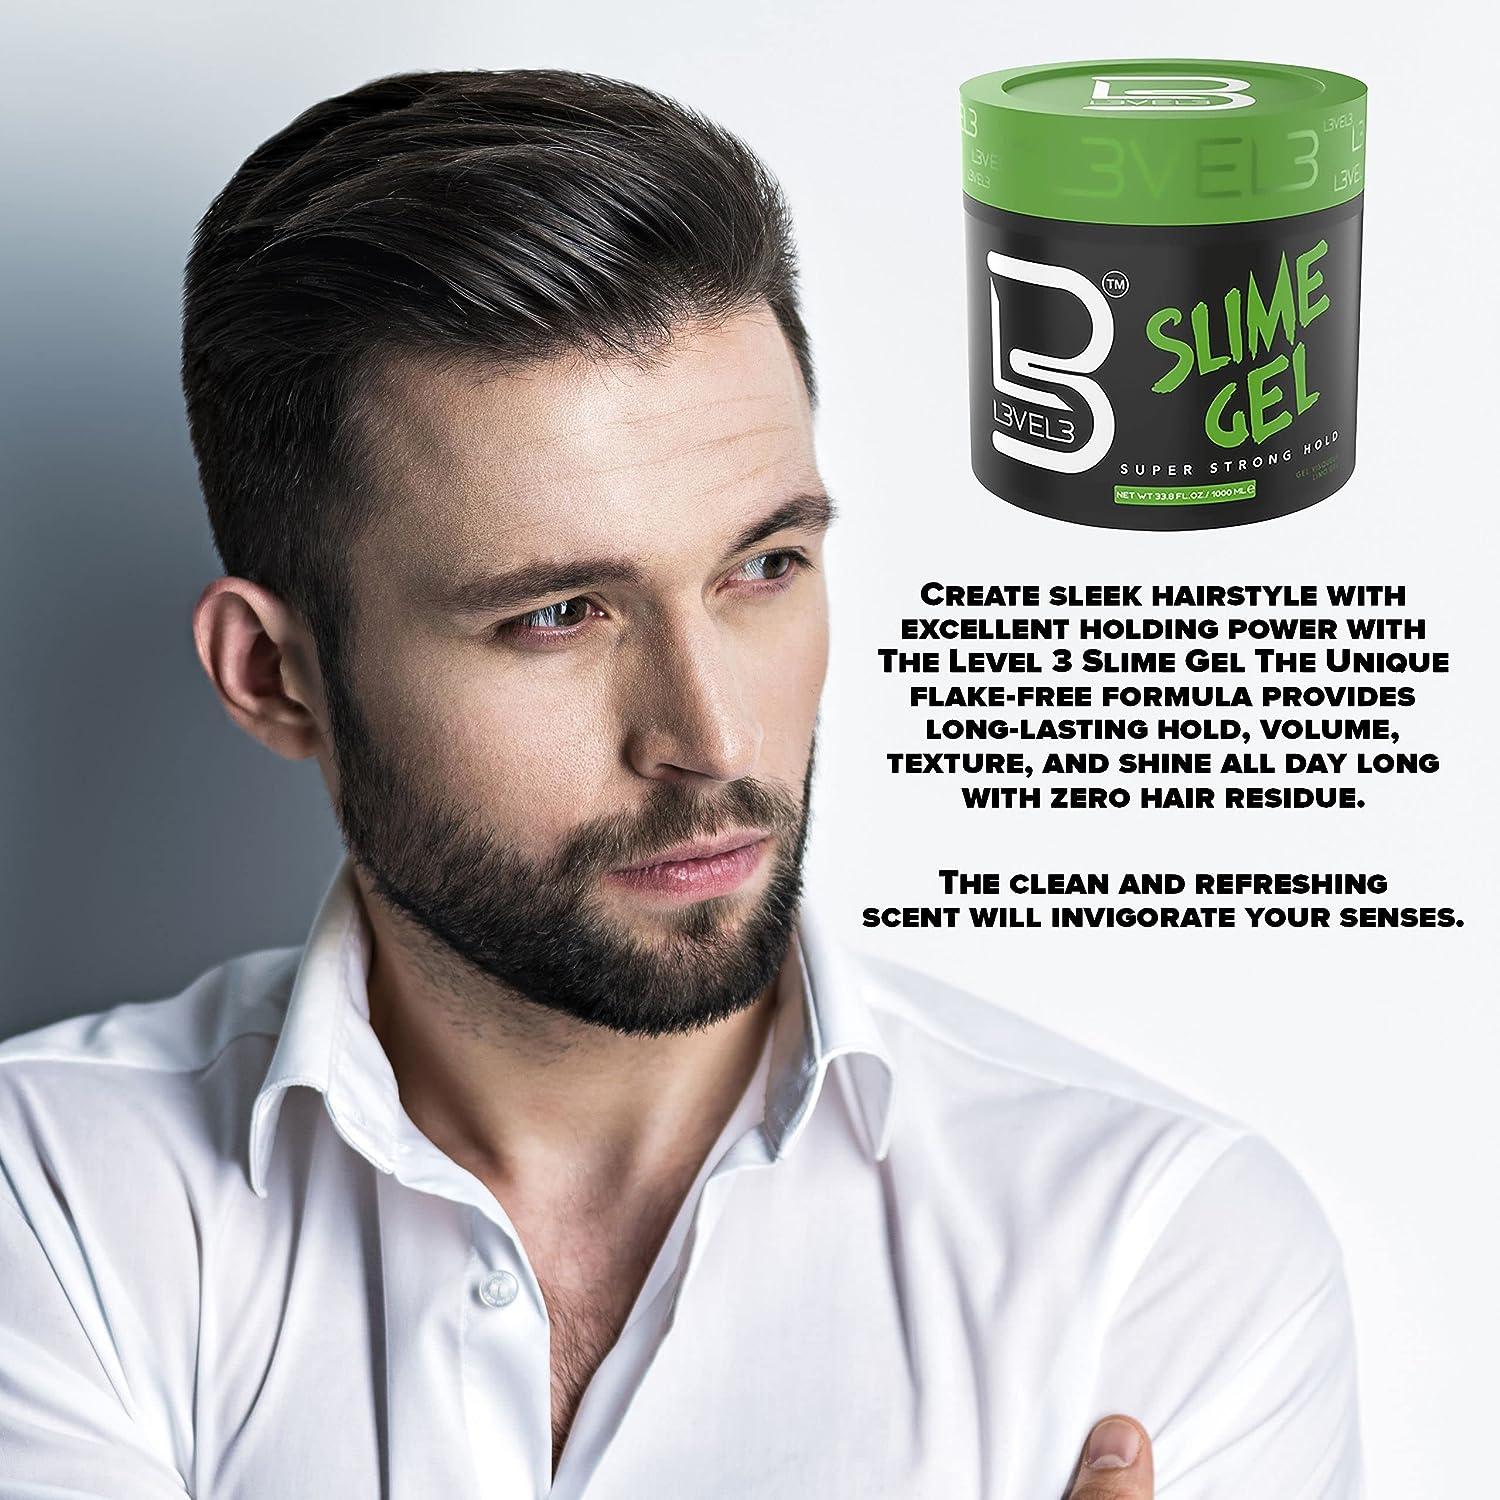 LV3 Spider Wax Hair Gel L3VEL3 Barber Review 